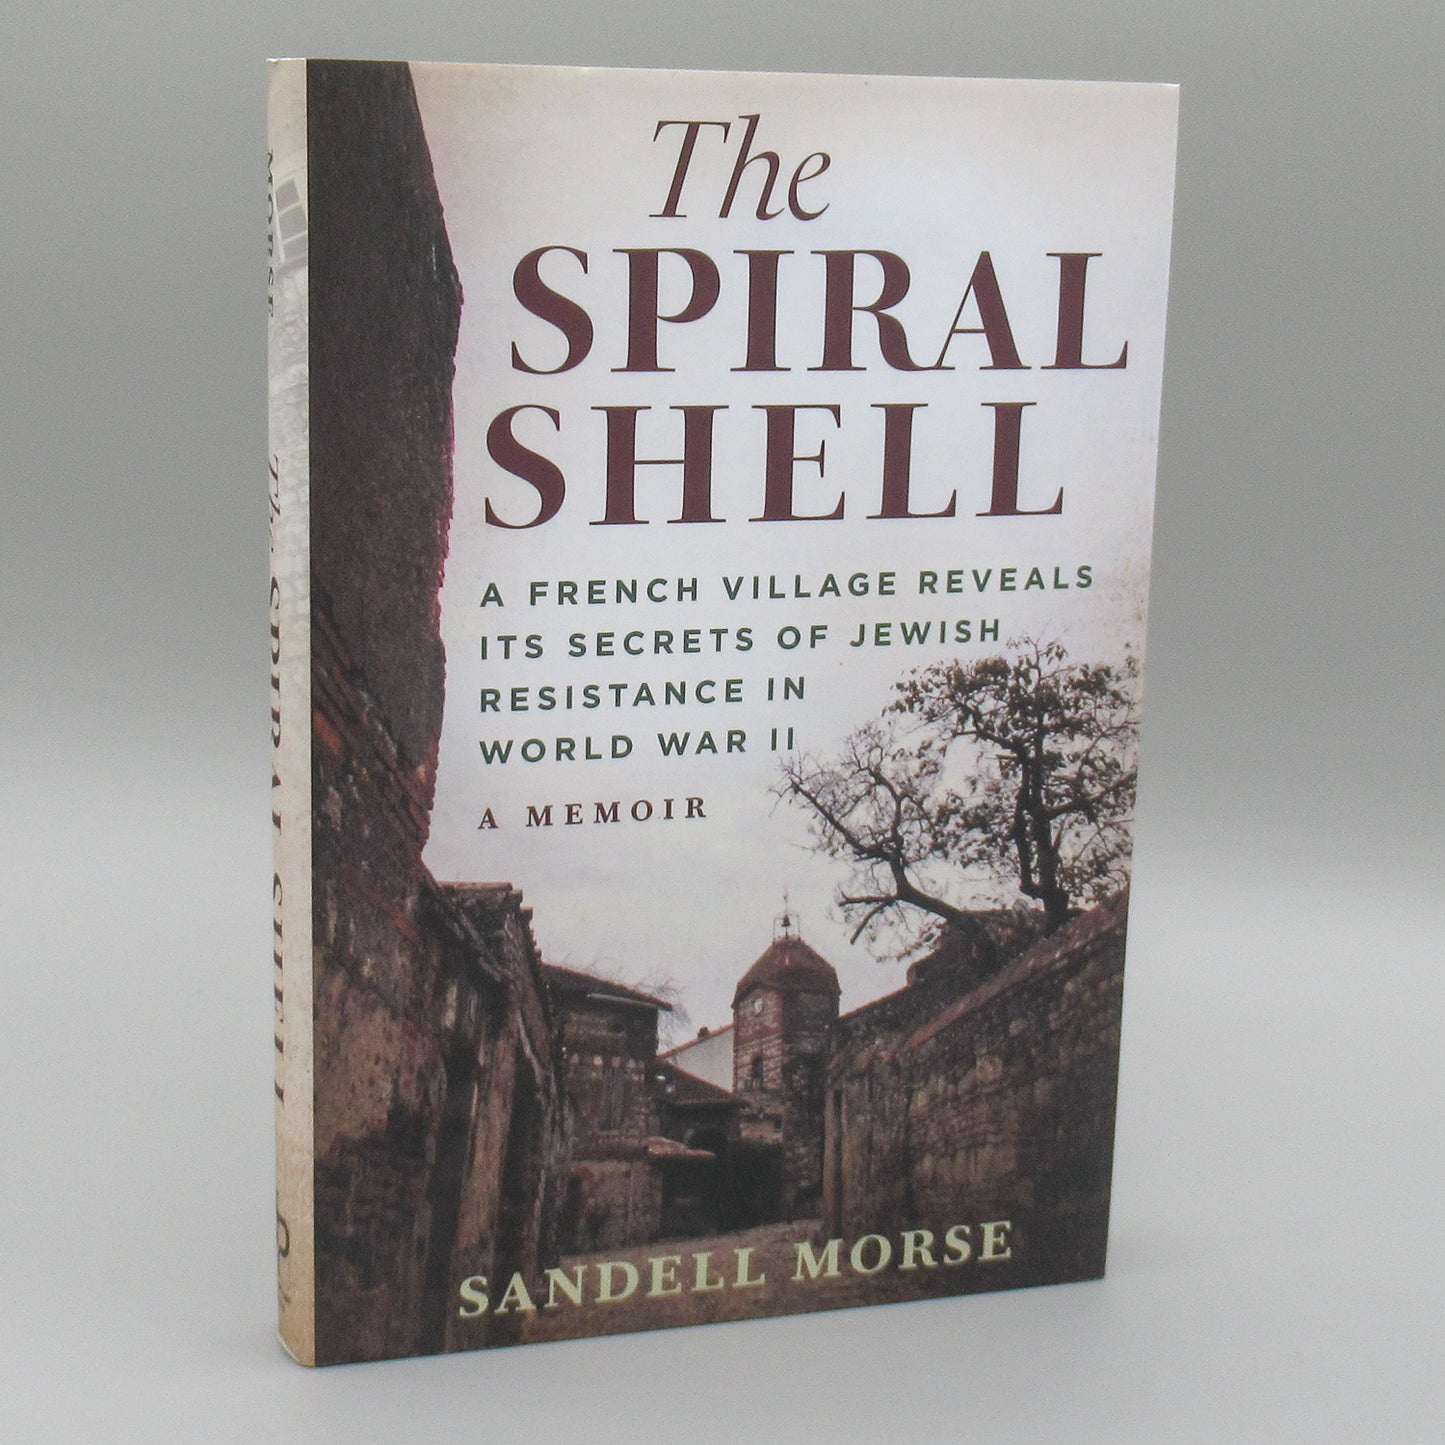 The Spiral Shell: A French Village Reveals its Secrets of Jewish Resistance in World War II